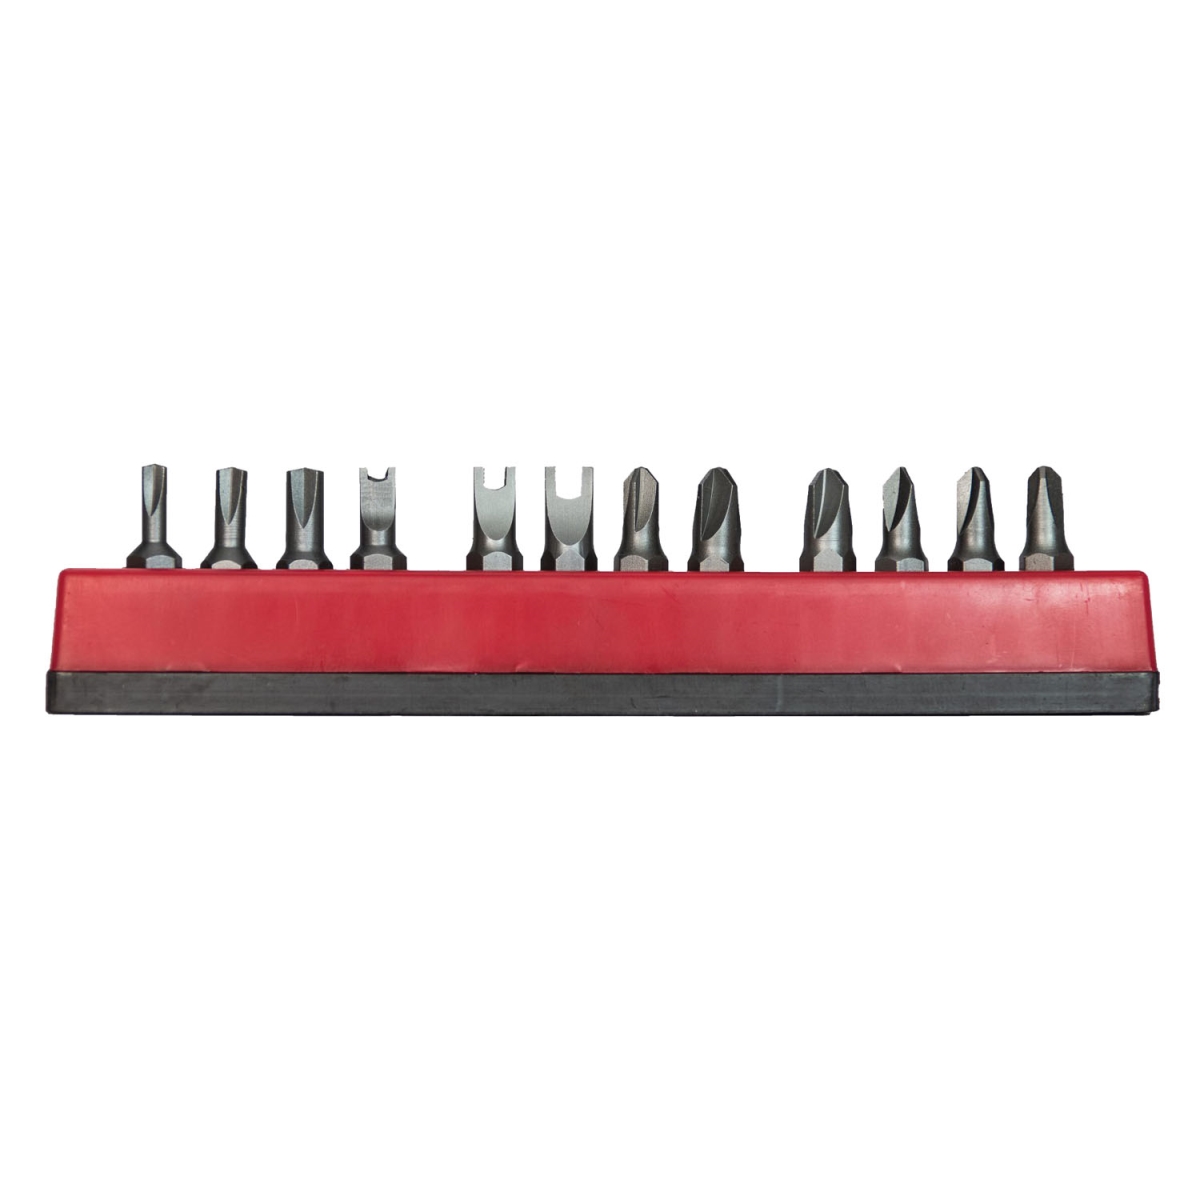 Picture of Mayhew Tools MAY-18016 Speciality Insert Bit Set - 12 Piece